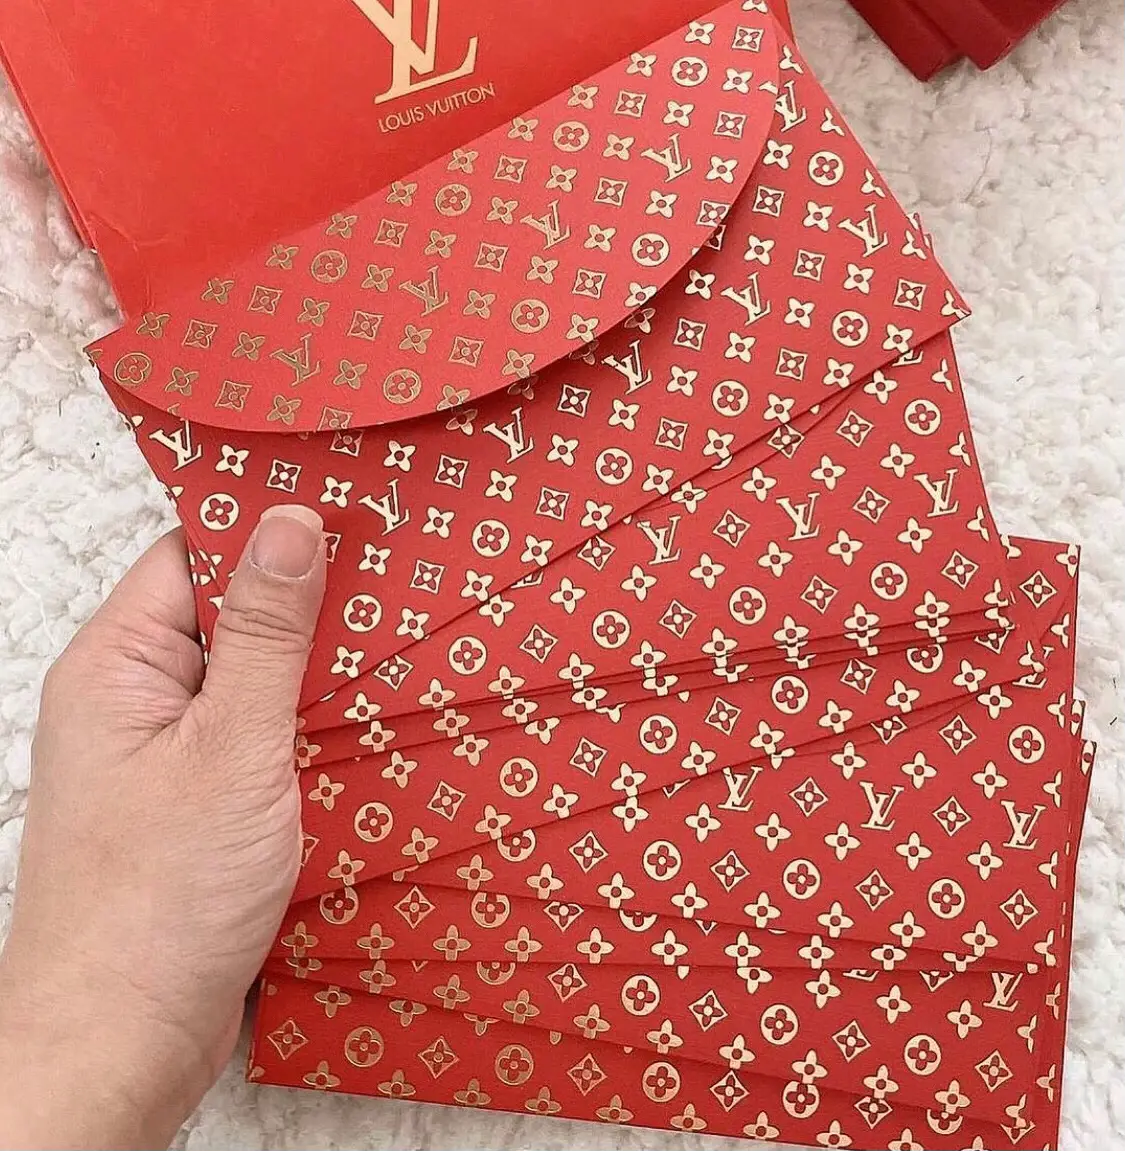 Louis Vuitton Key Pouch - a huge disappointment? Is the LV